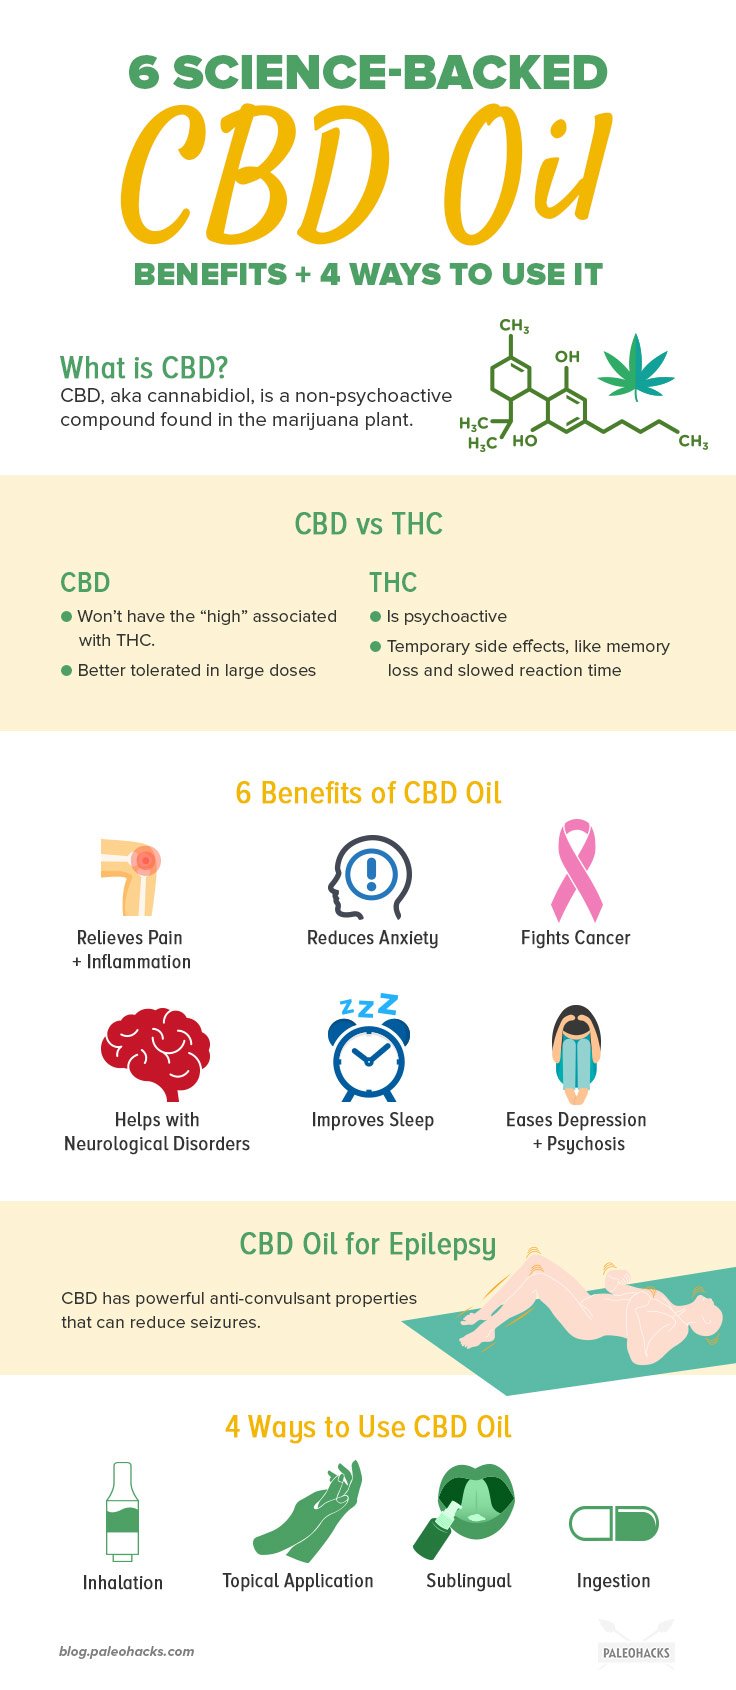 Curious about CBD (Cannabidiol) Oil and how it can naturally boost your health? Here’s how to reap its benefits - without the high.